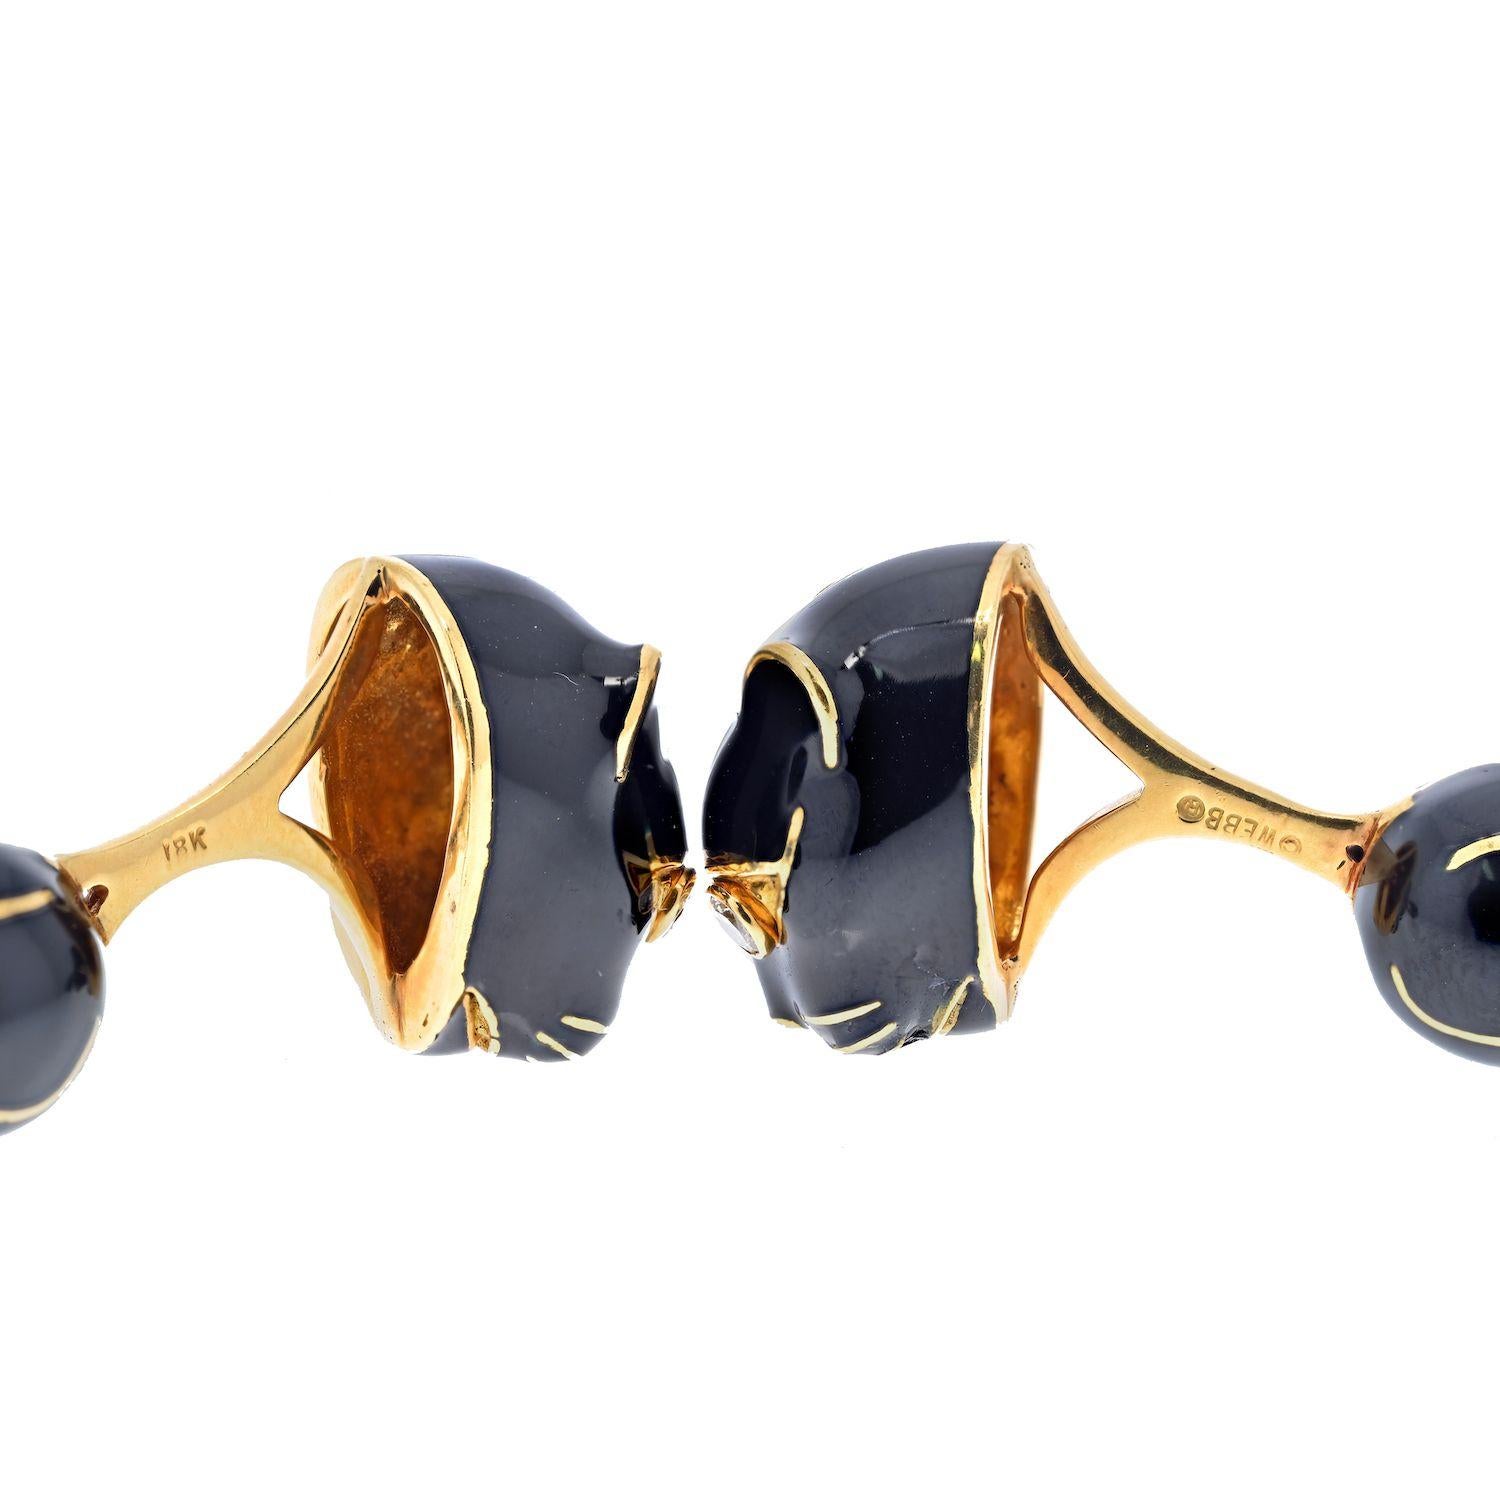 A pair of cufflinks and three studs made in 18K Yellow Gold by David Webb in a shape of black panther heads. Eyes are mounted with round cut diamonds. All of the studs and heads are of a smooth polished finish. 
Bigger Panthers measure: 17mm long x